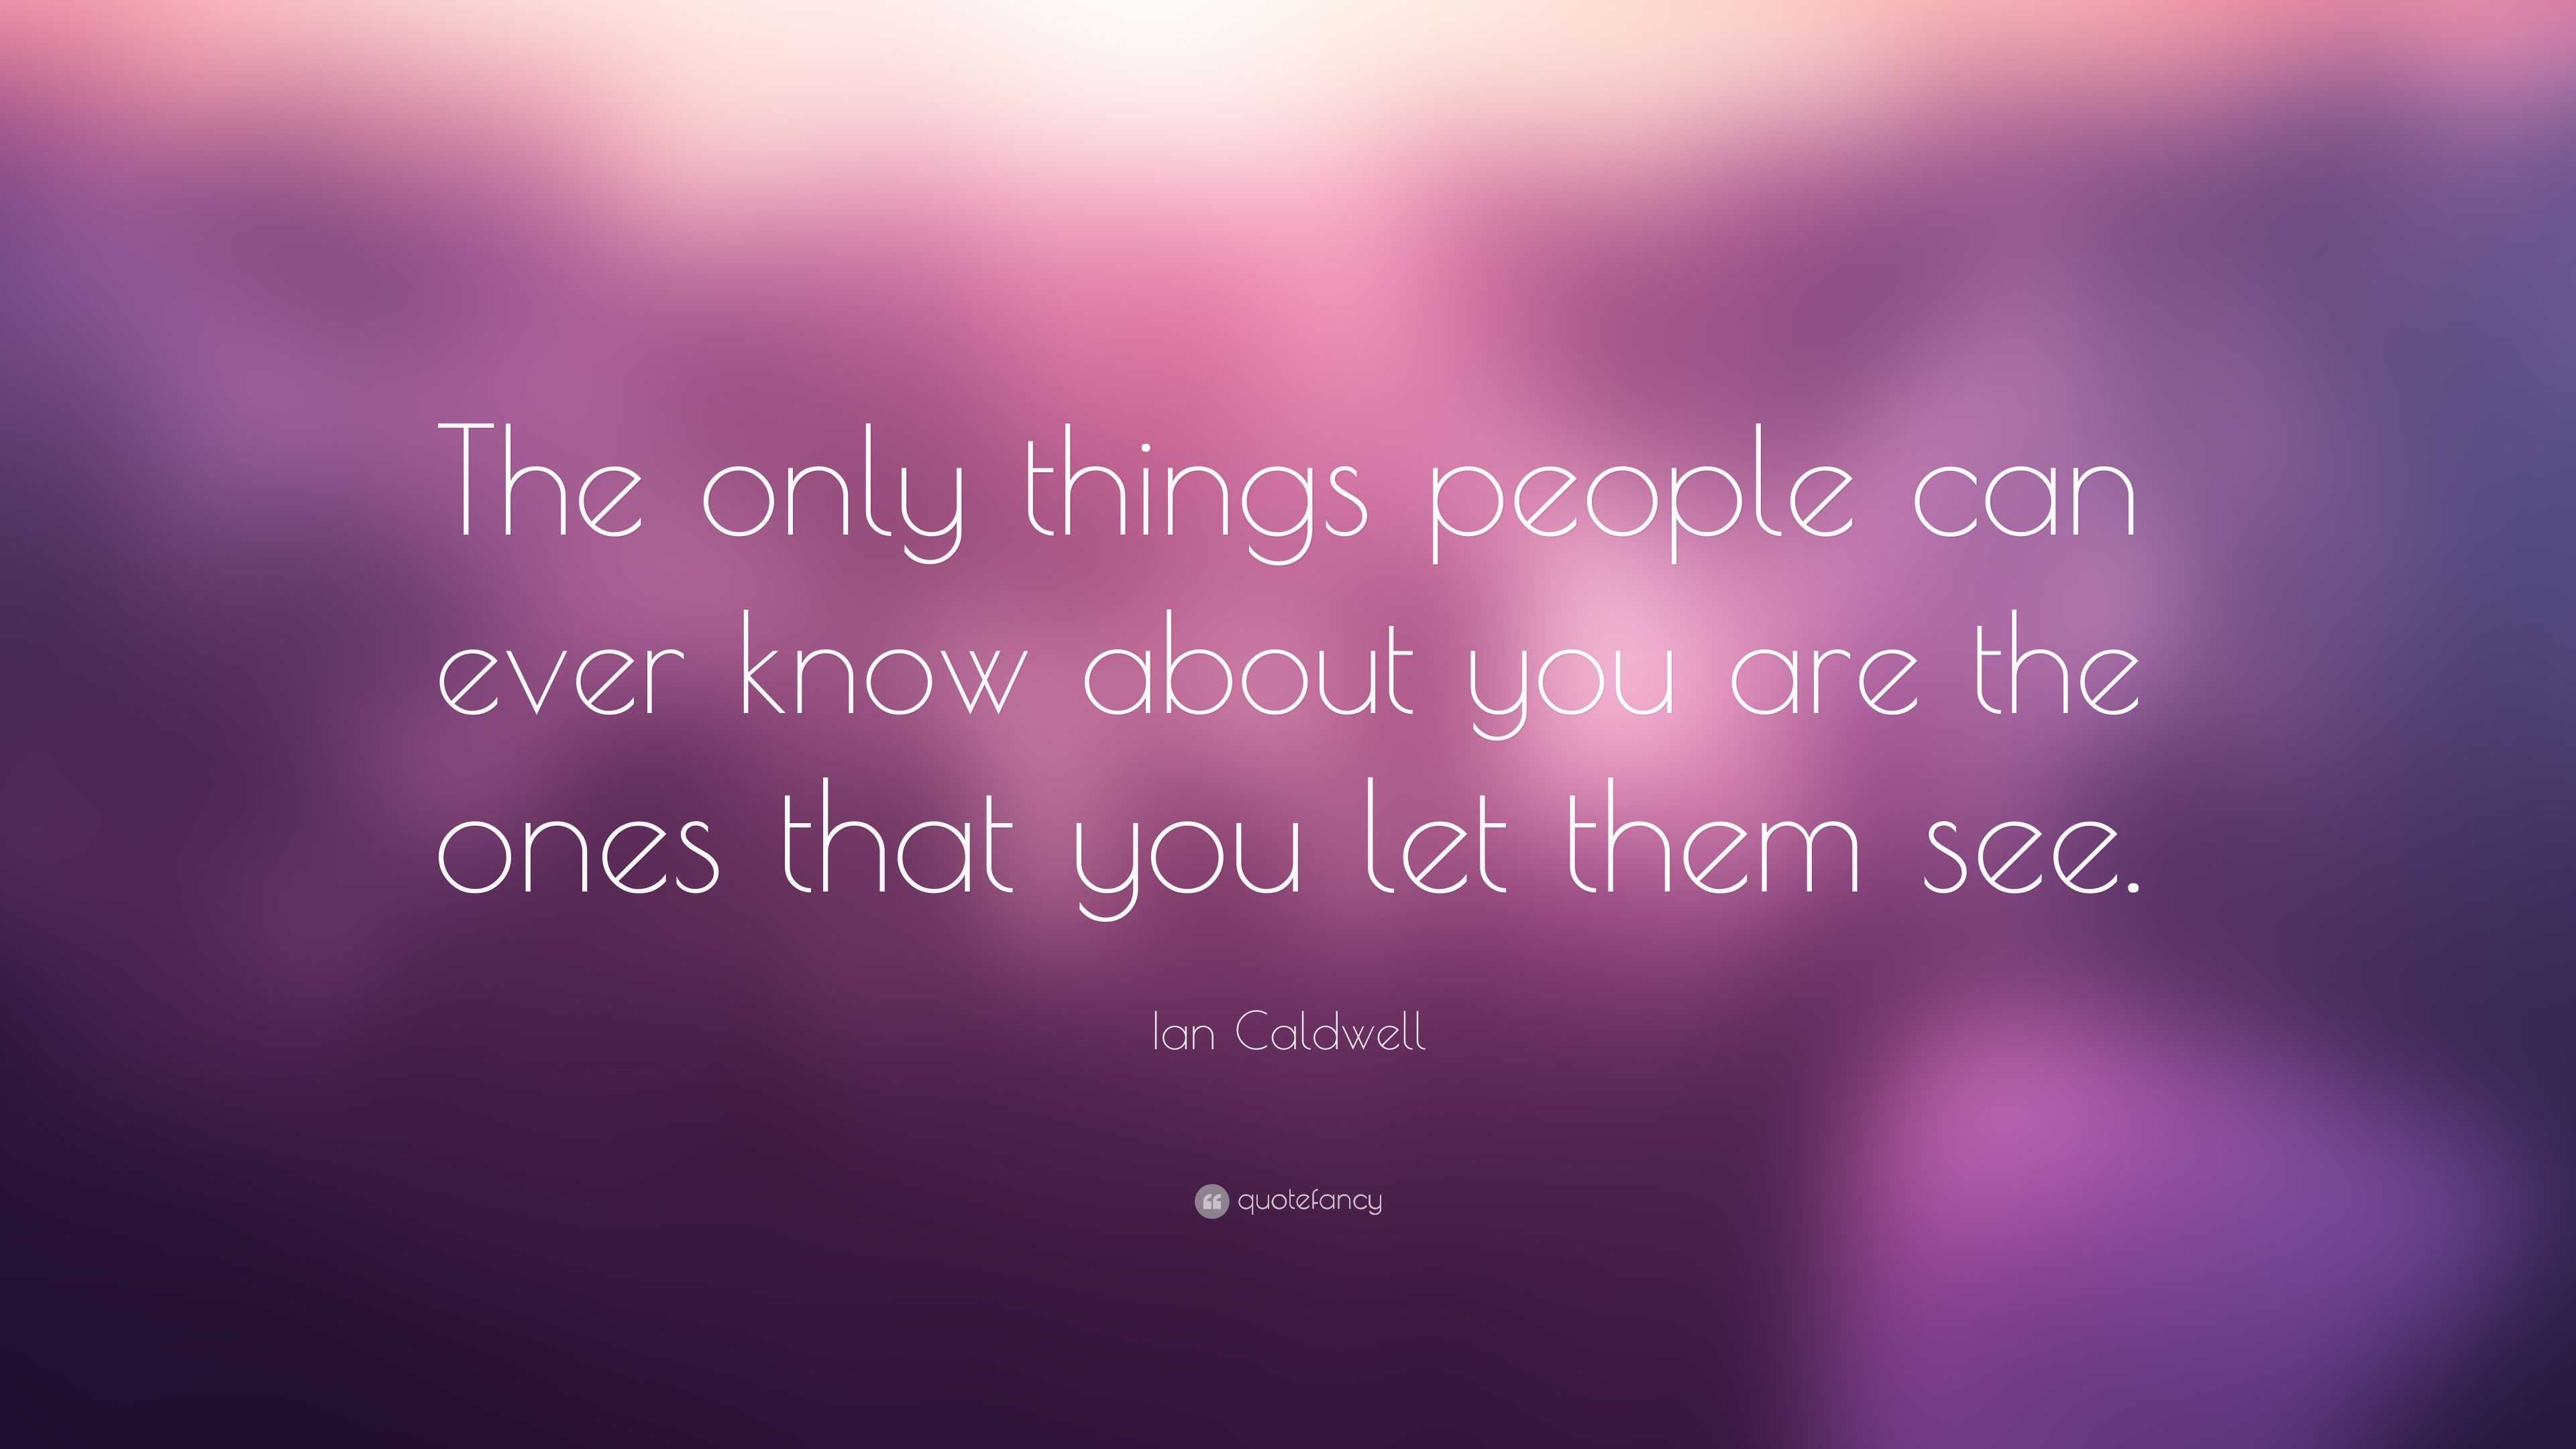 Ian Caldwell Quote: “The only things people can ever know about you are ...